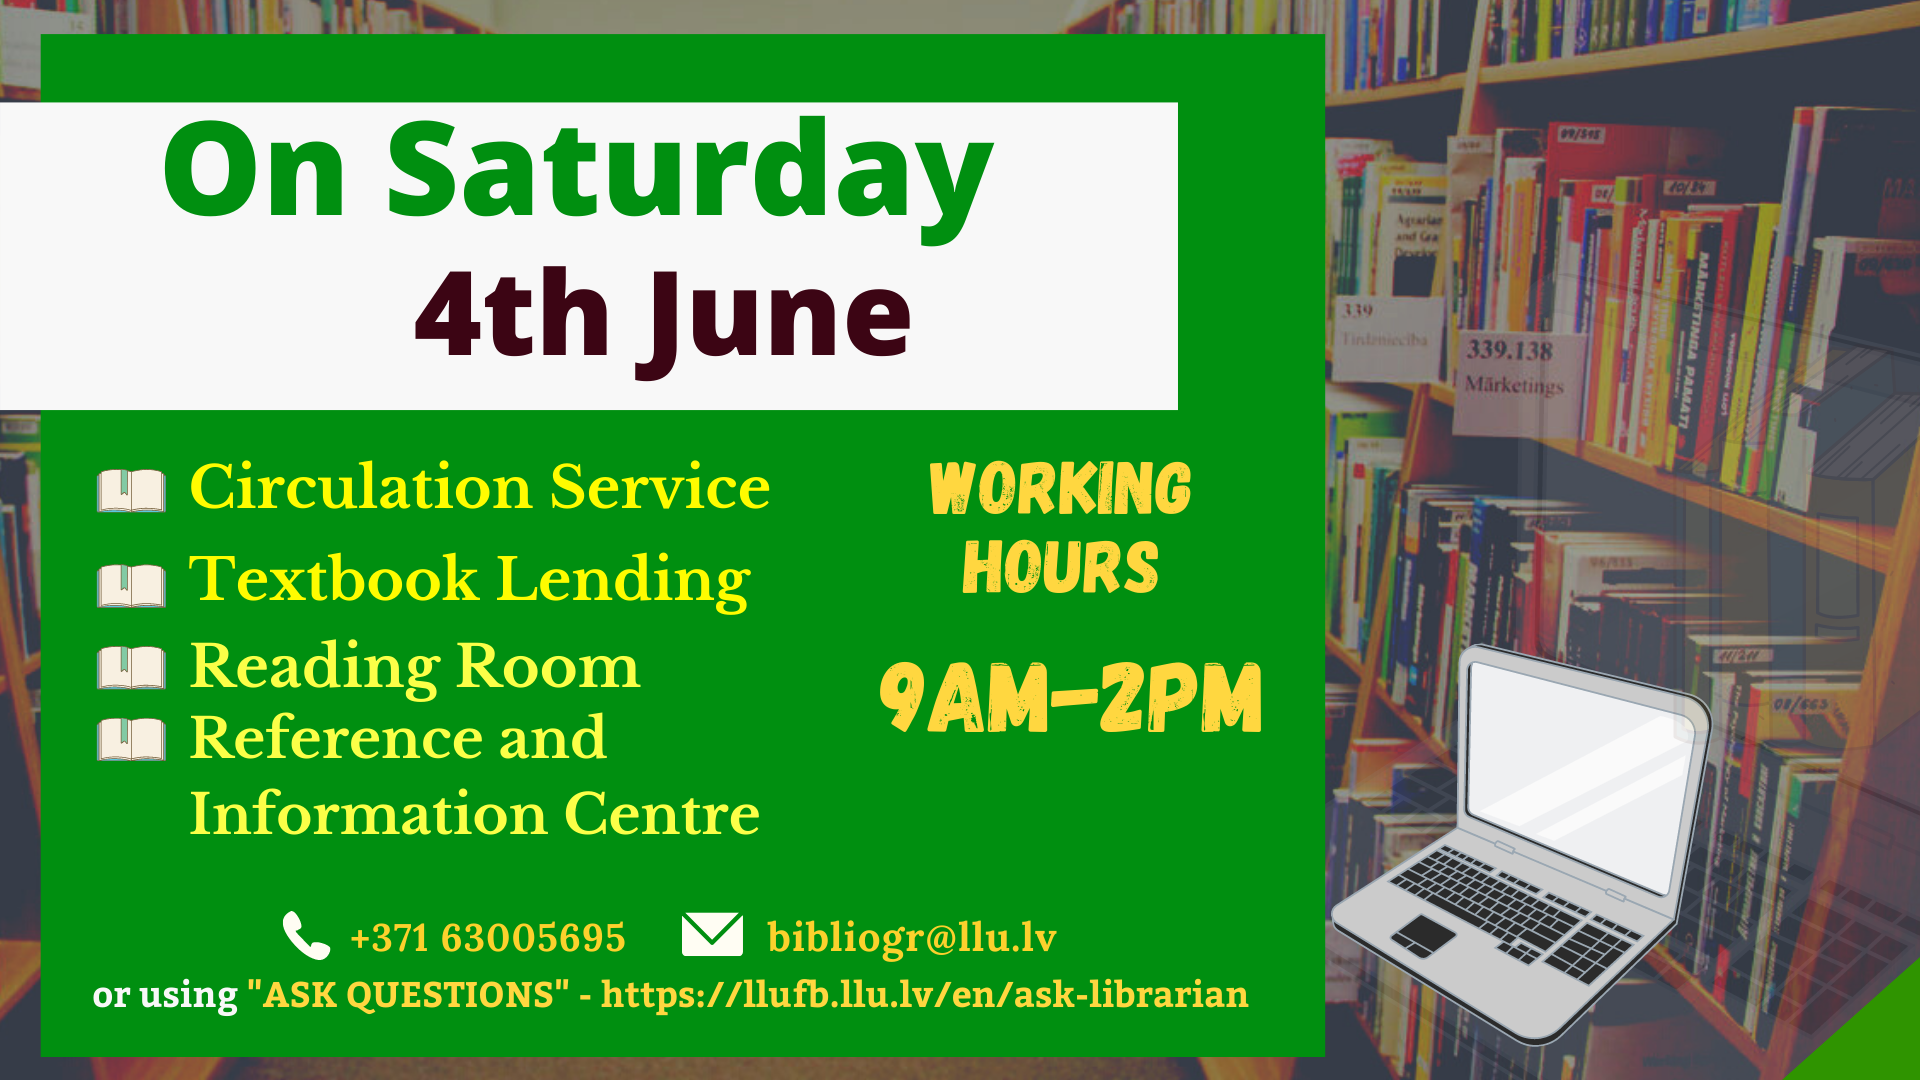 Library of the Latvia University of Life Sciences and Technologies on Saturday 4 June working hours 9am-2pm